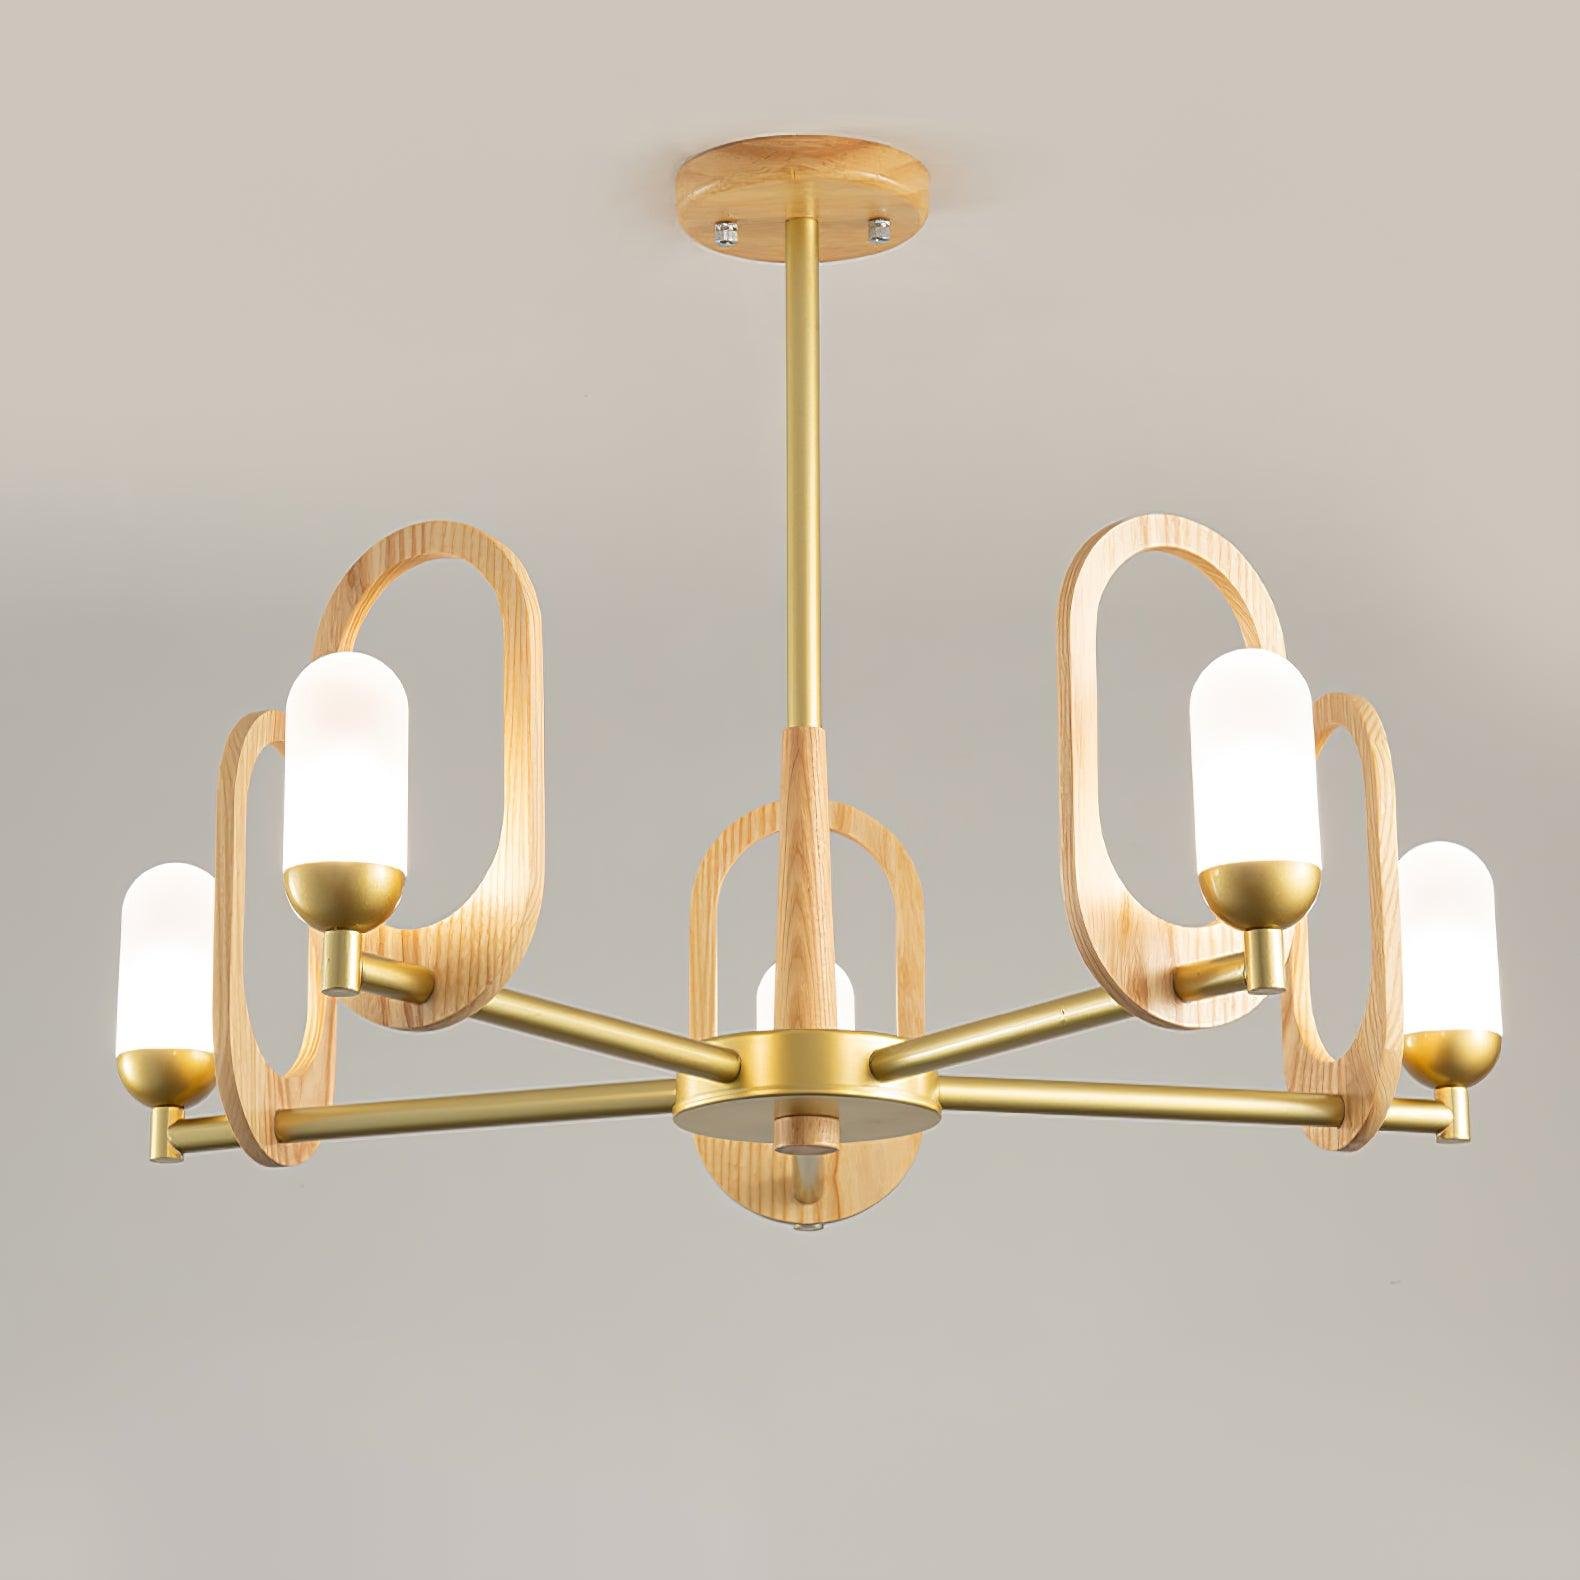 Wood Art Halo Chandelier with 5 Heads measuring ∅ 27.6″ x H 17.7″ (Dia 70cm x H 45cm) in a Wood Color and Gold Finish